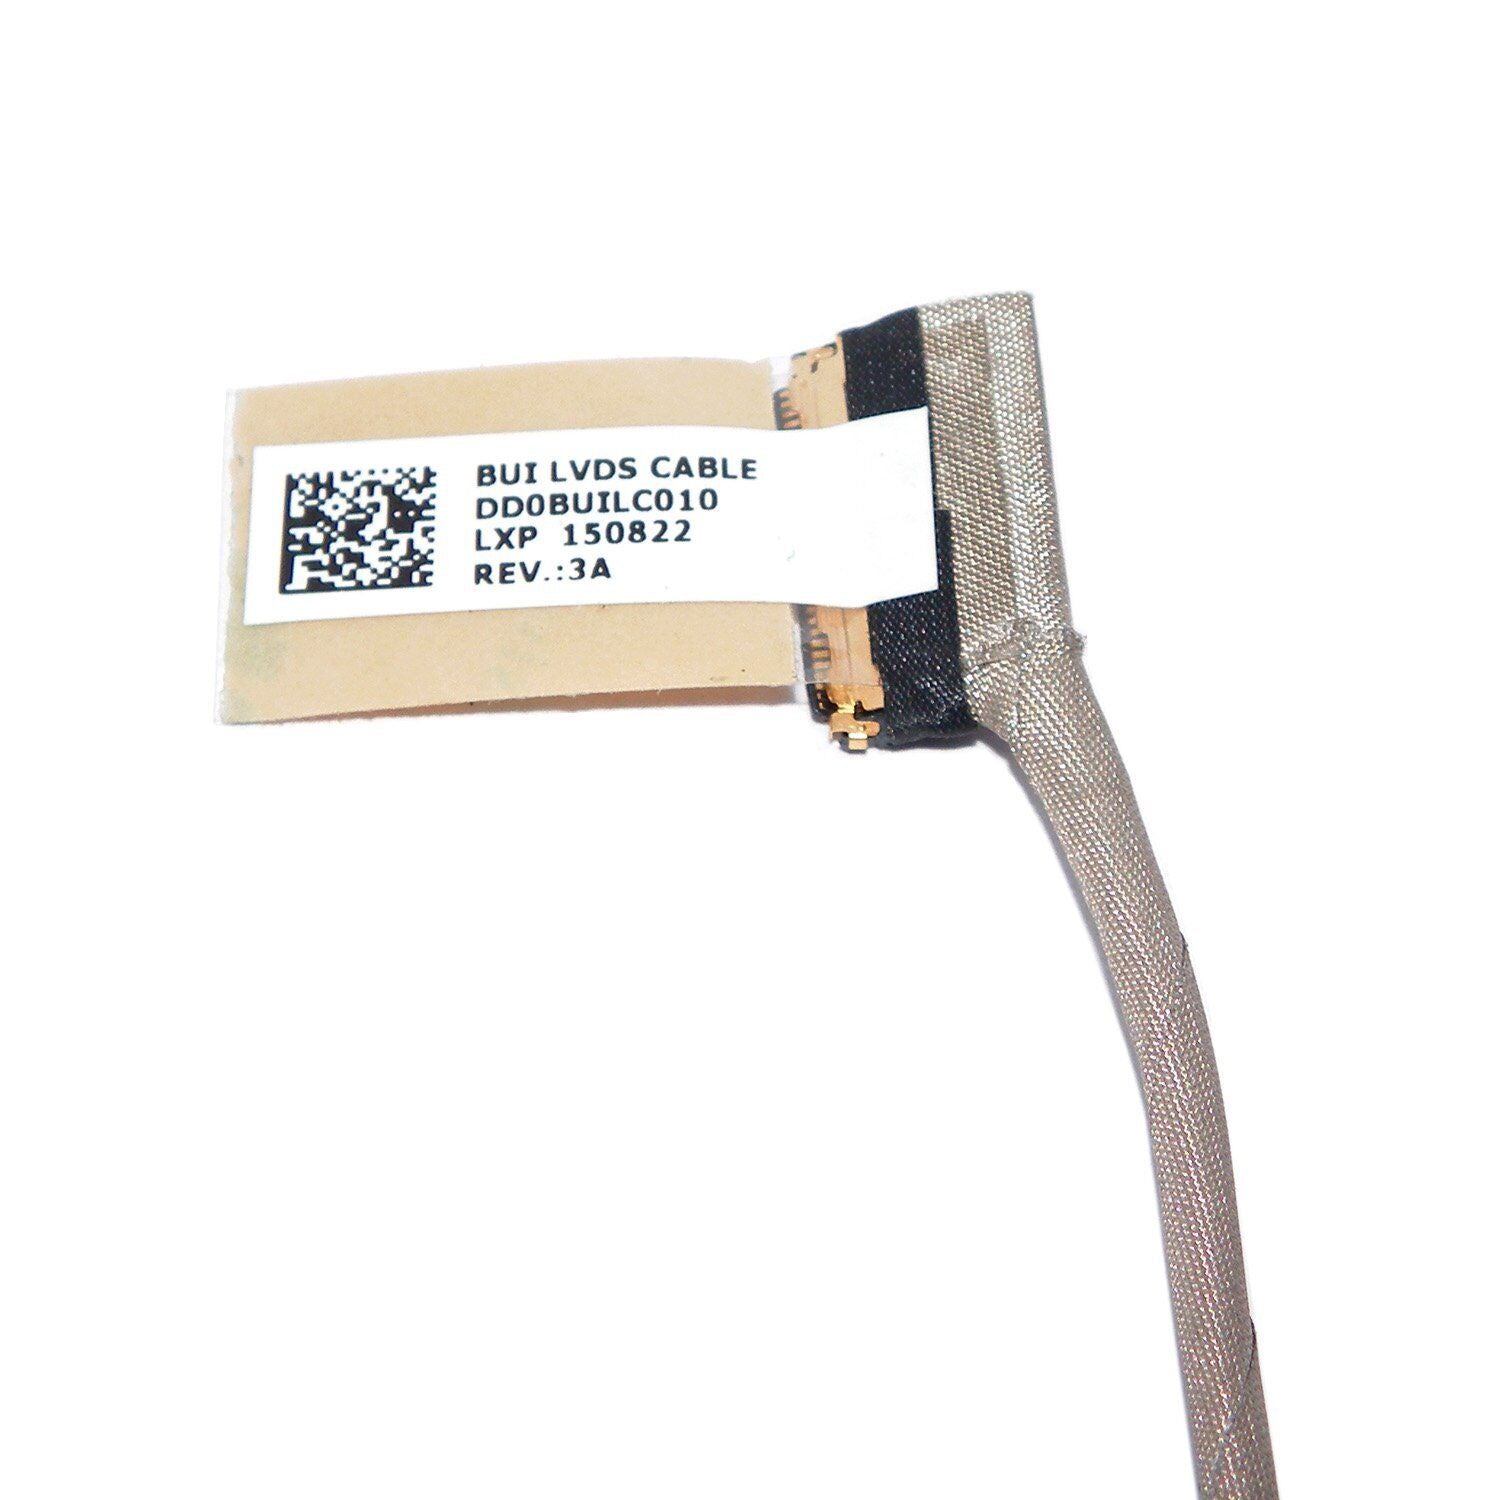 Toshiba New LCD LED LVDS Display Video Screen Cable Chromebook 2 CB35-C CB35-C3300 DD0BUILC010 DD0BUILC000